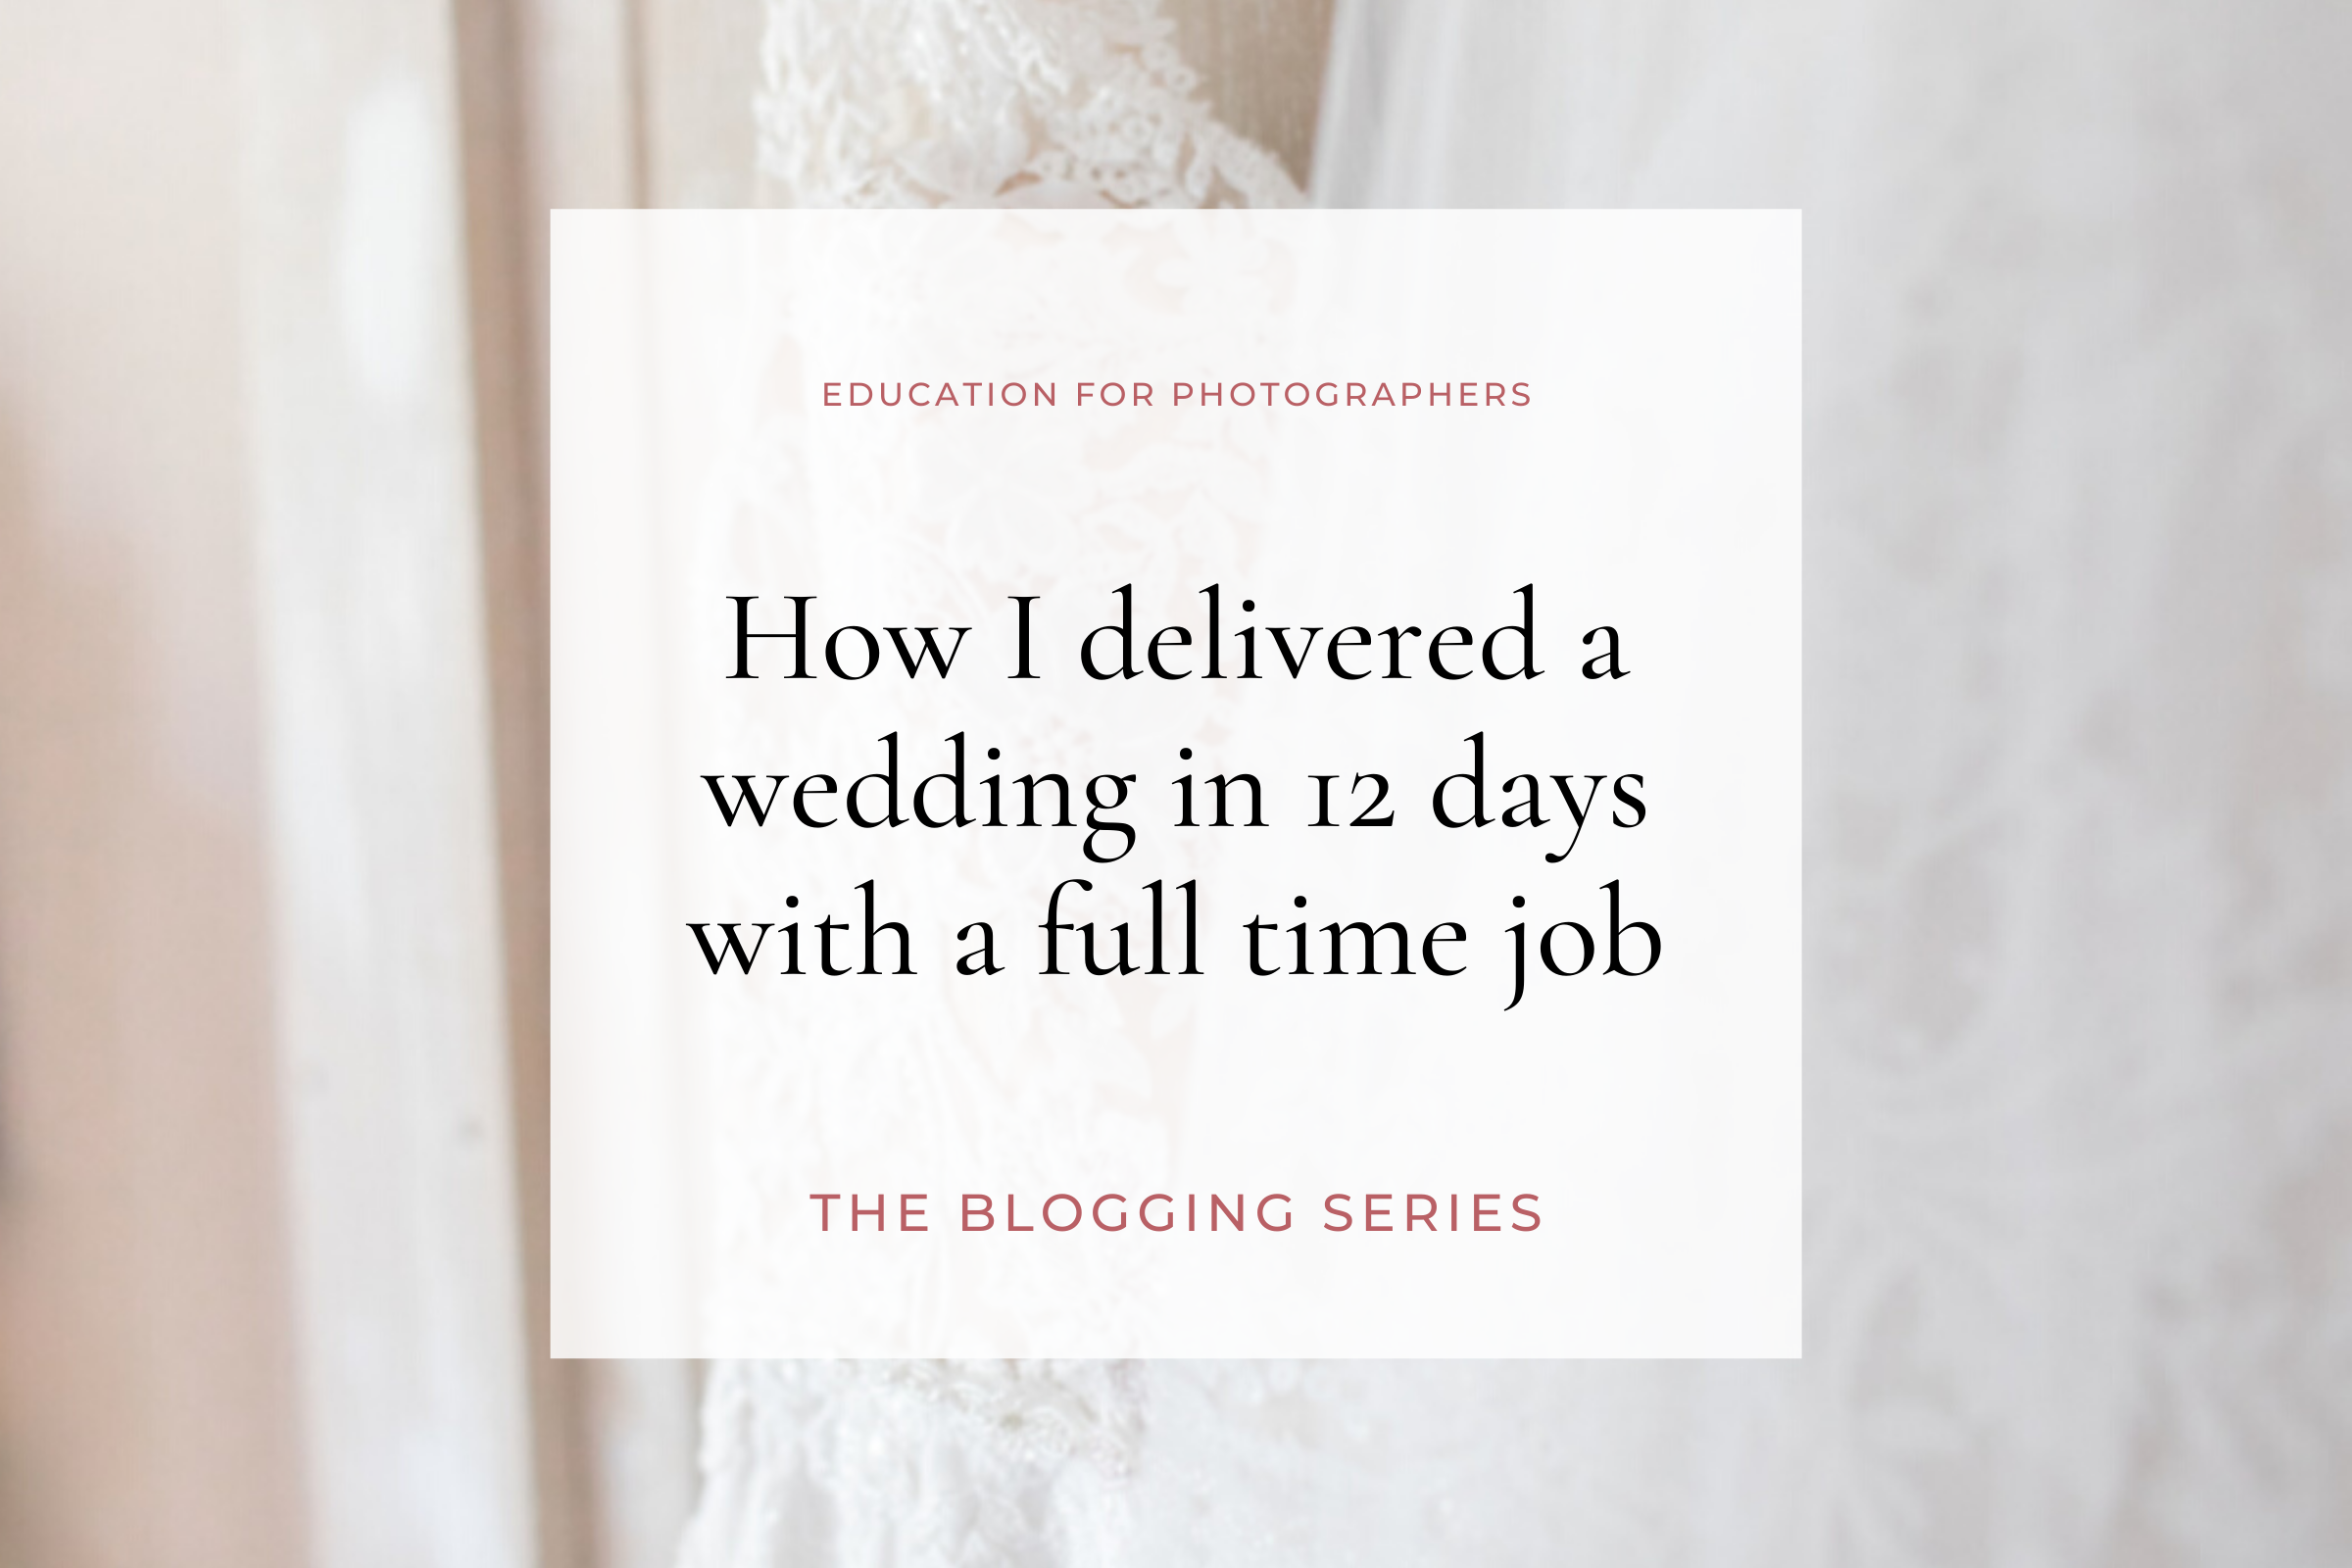 Deliver wedding galleries faster with this workflow